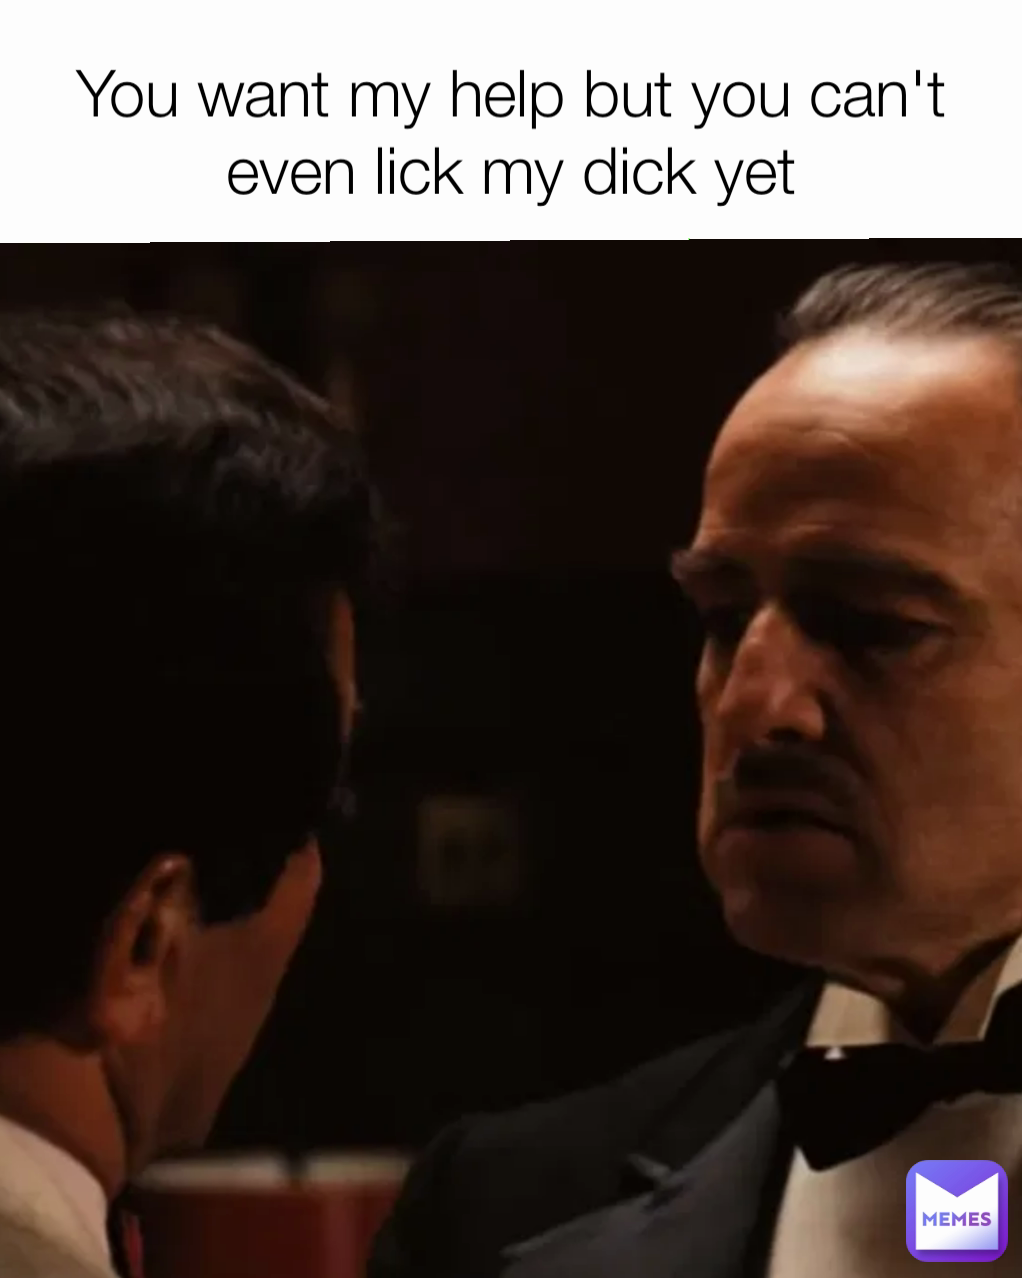 You want my help but you can't even lick my dick yet